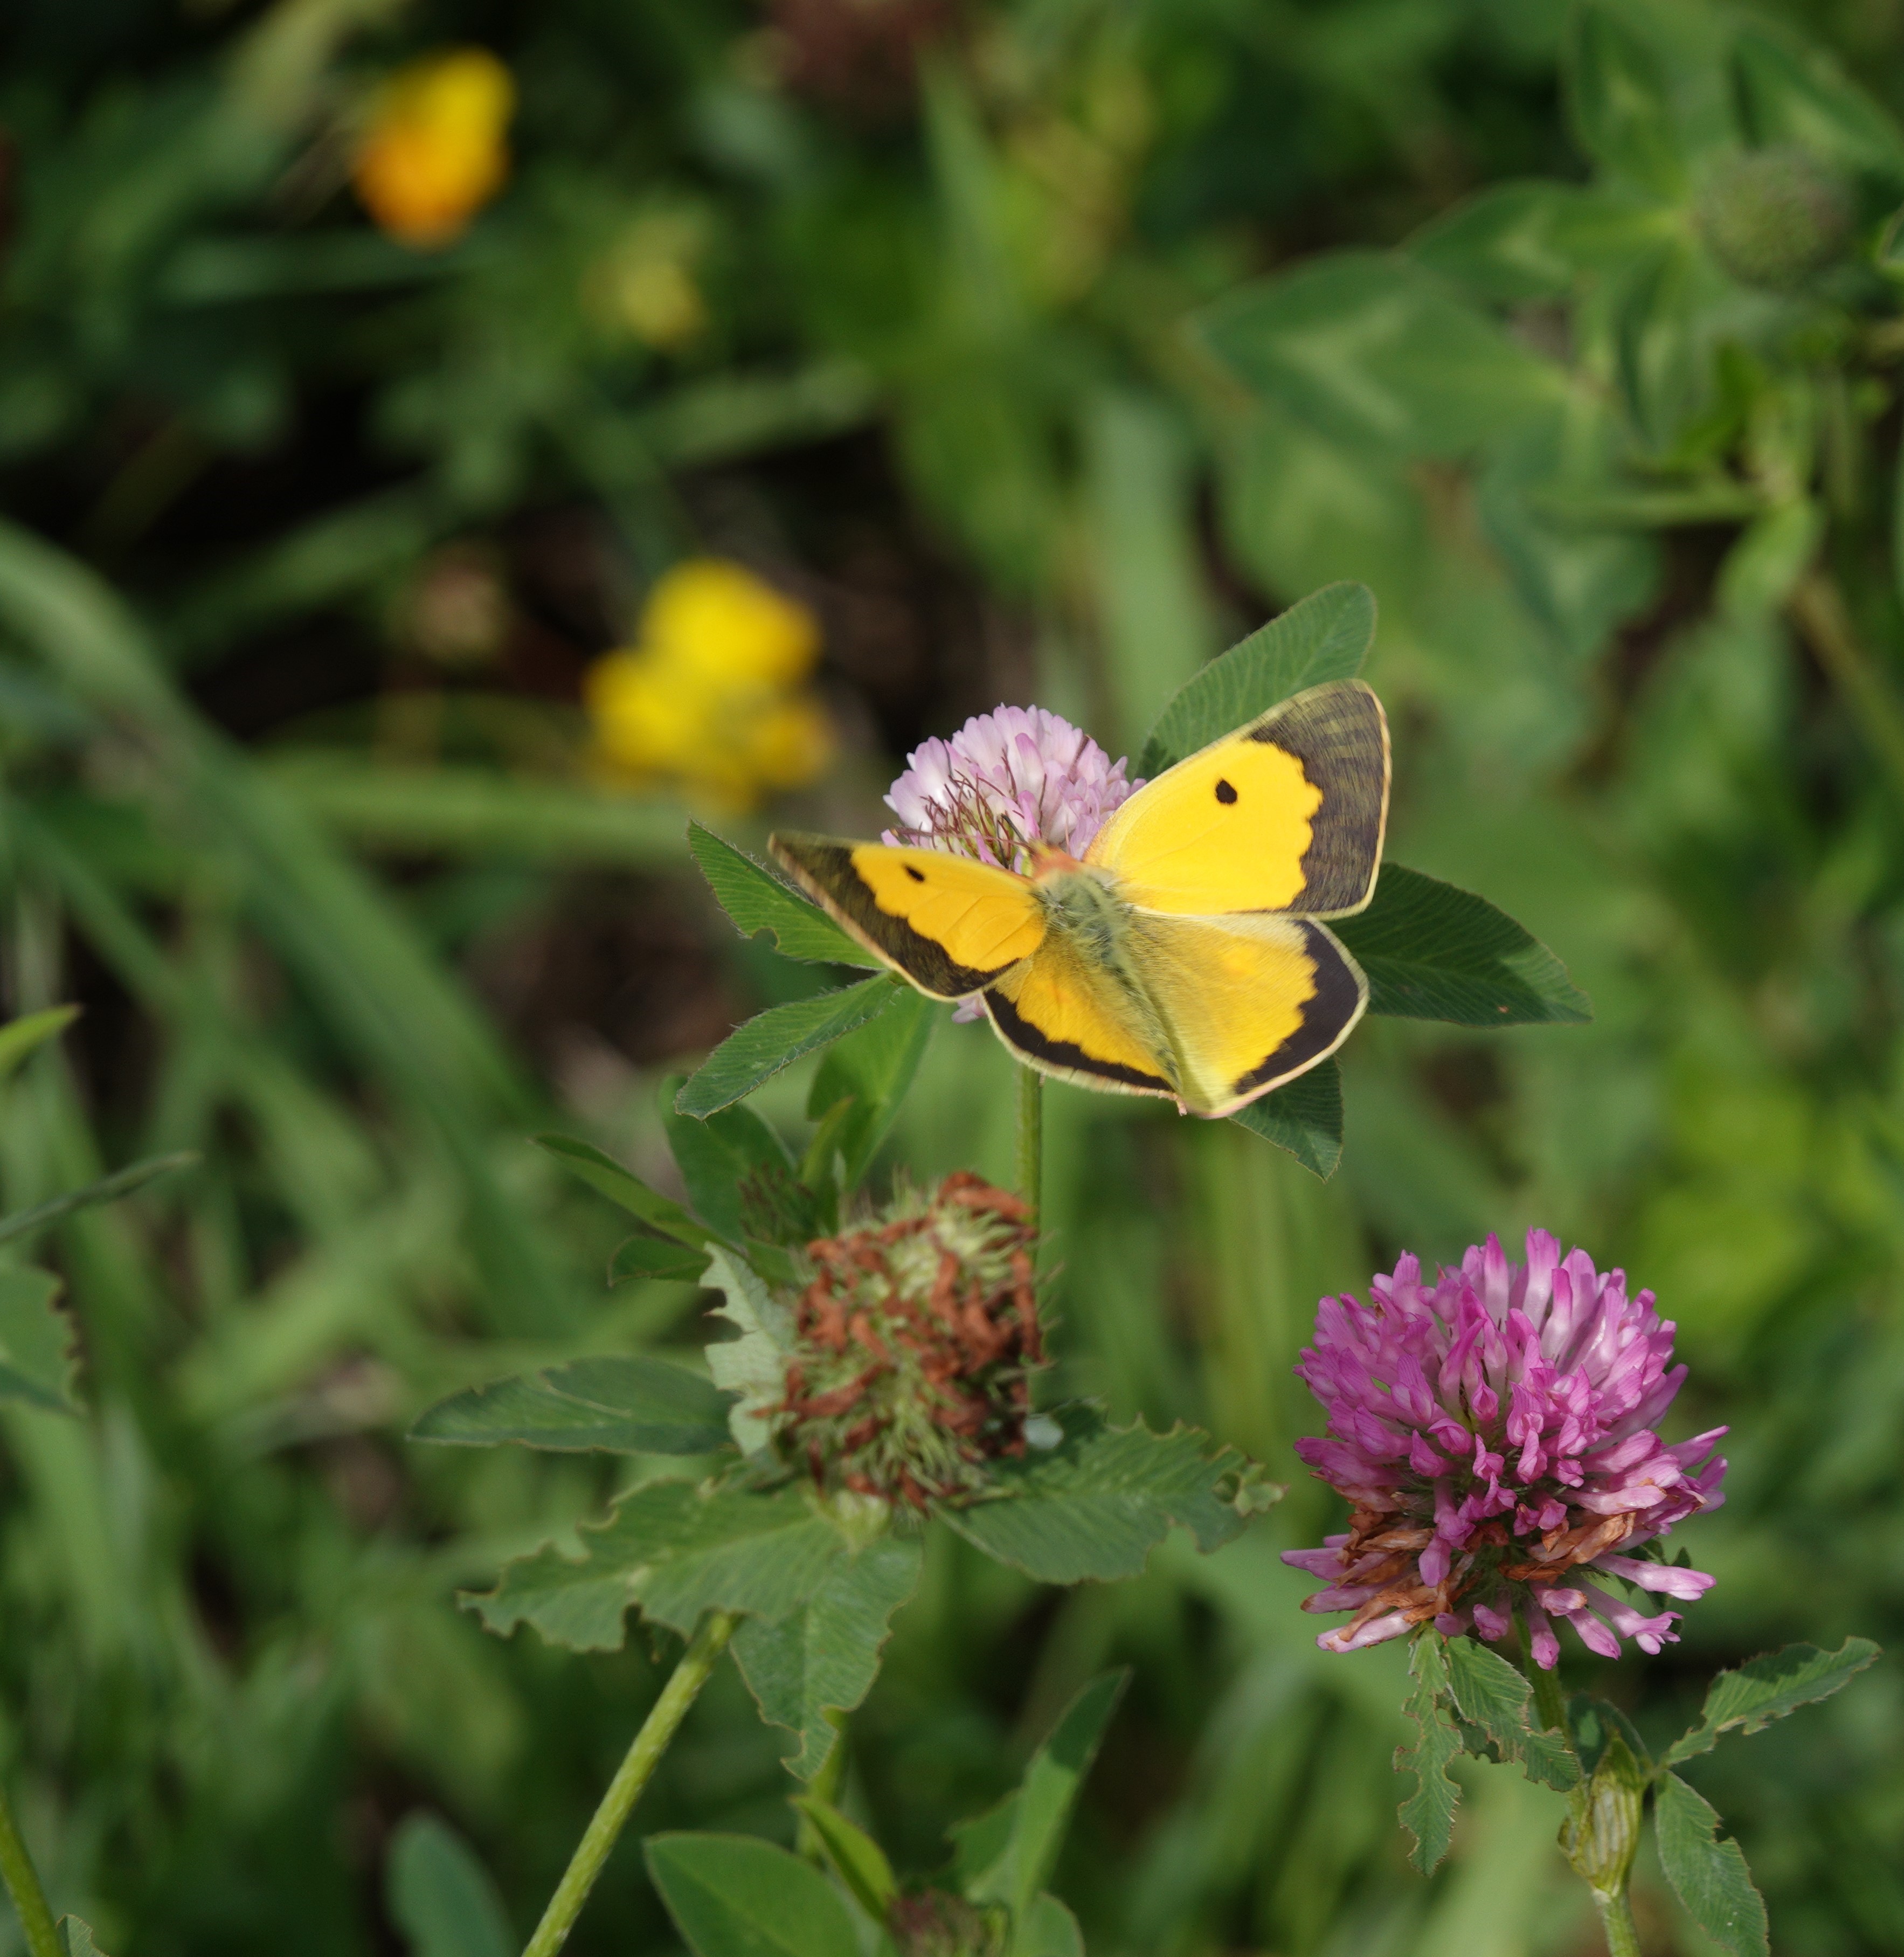 A rare open-winged shot of a male Clouded Yellow